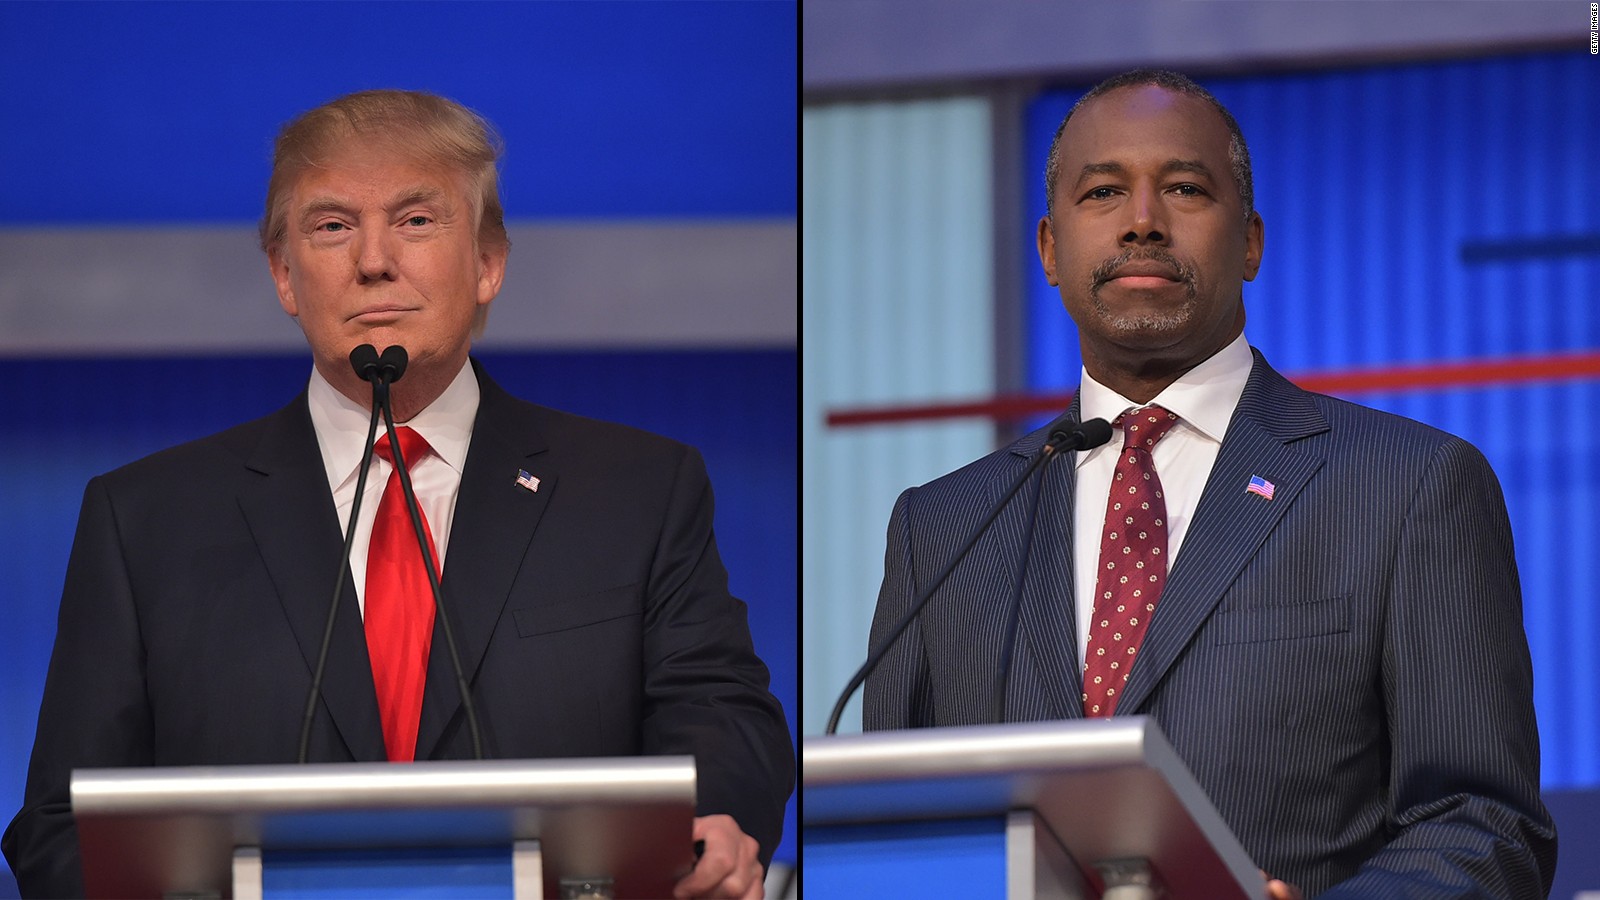 What To Watch For In Tonight’s GOP Debate